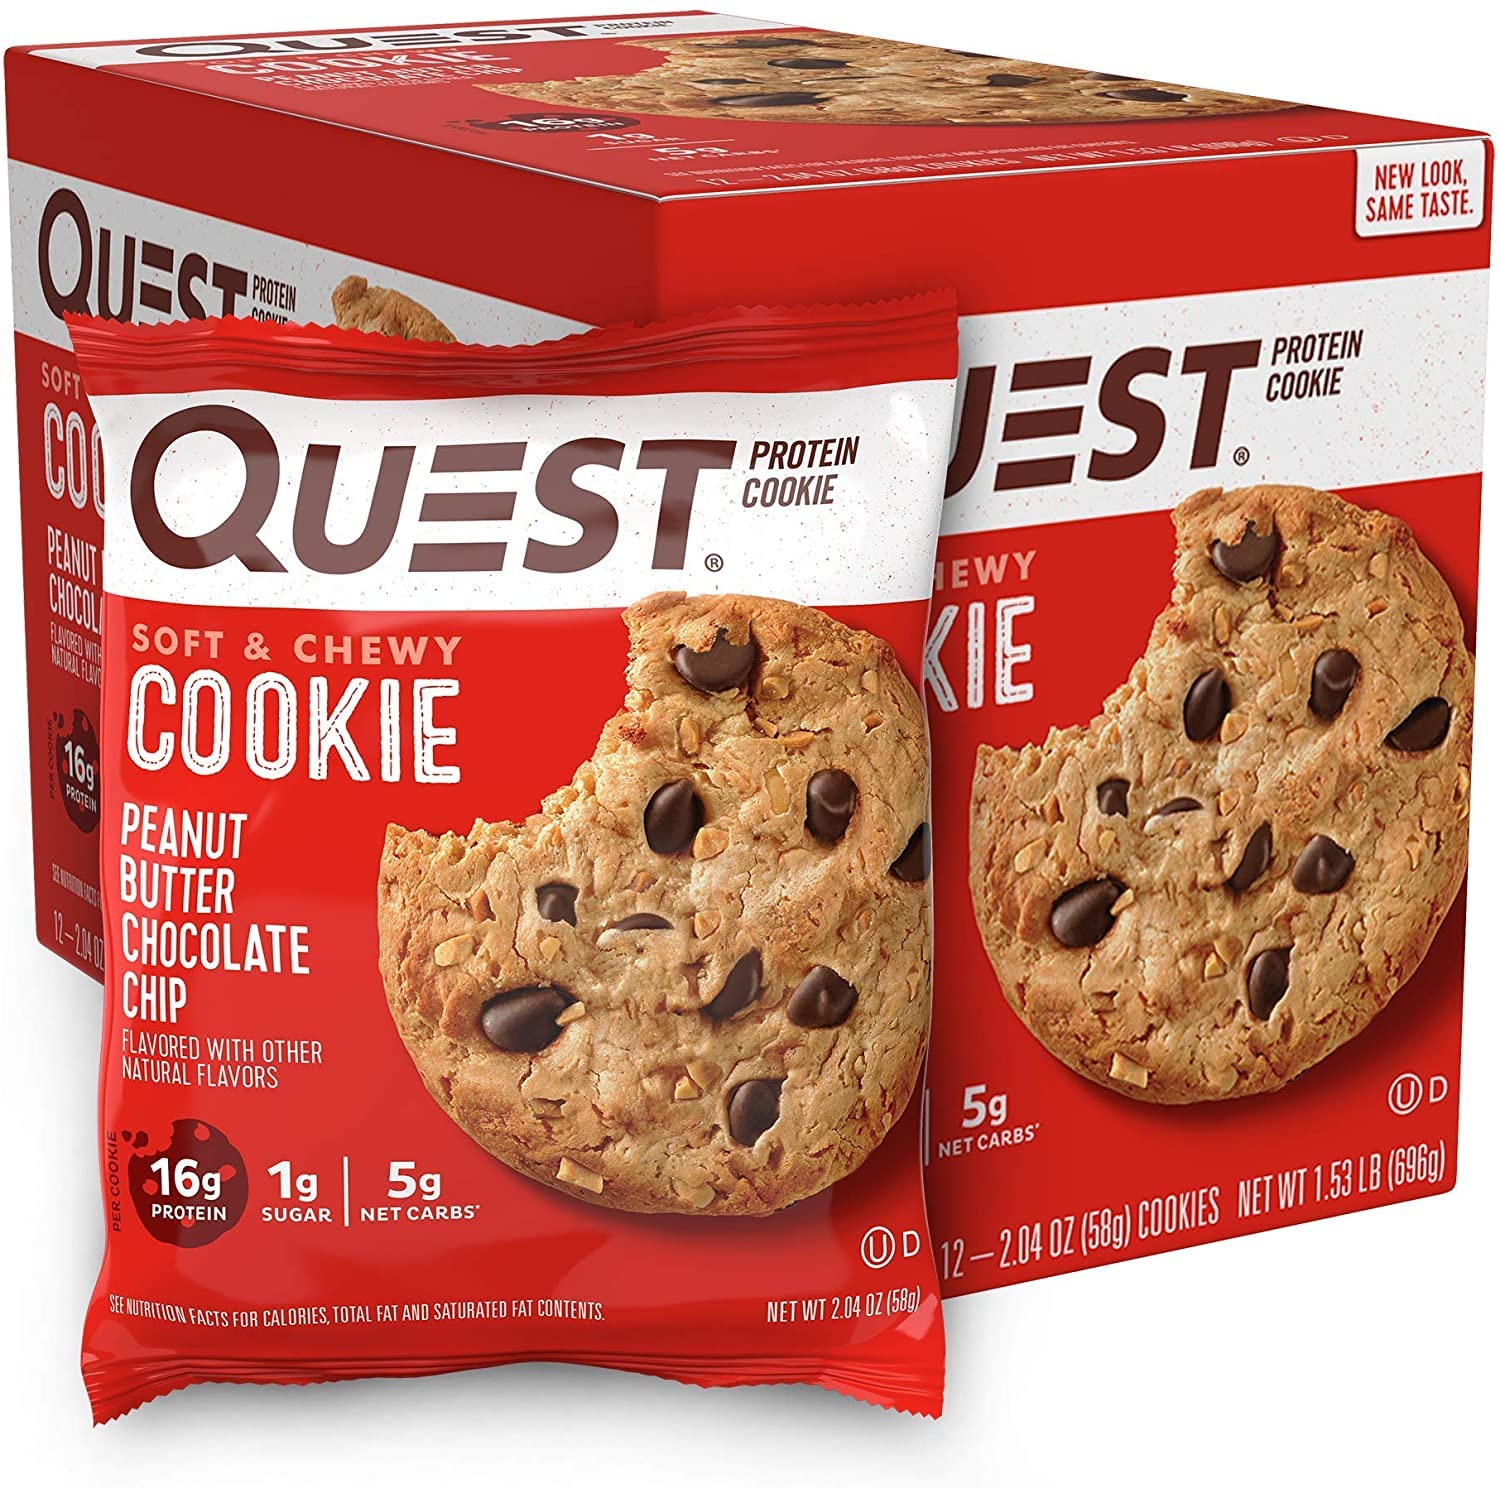 Quest Nutrition Peanut Butter Chocolate Chip High Protein Cookie, Keto Friendly, Low Carb, 24.5 Oz, 12 count (Pack of 1)~$15.29 @ Amazon~Free Prime Shipping!